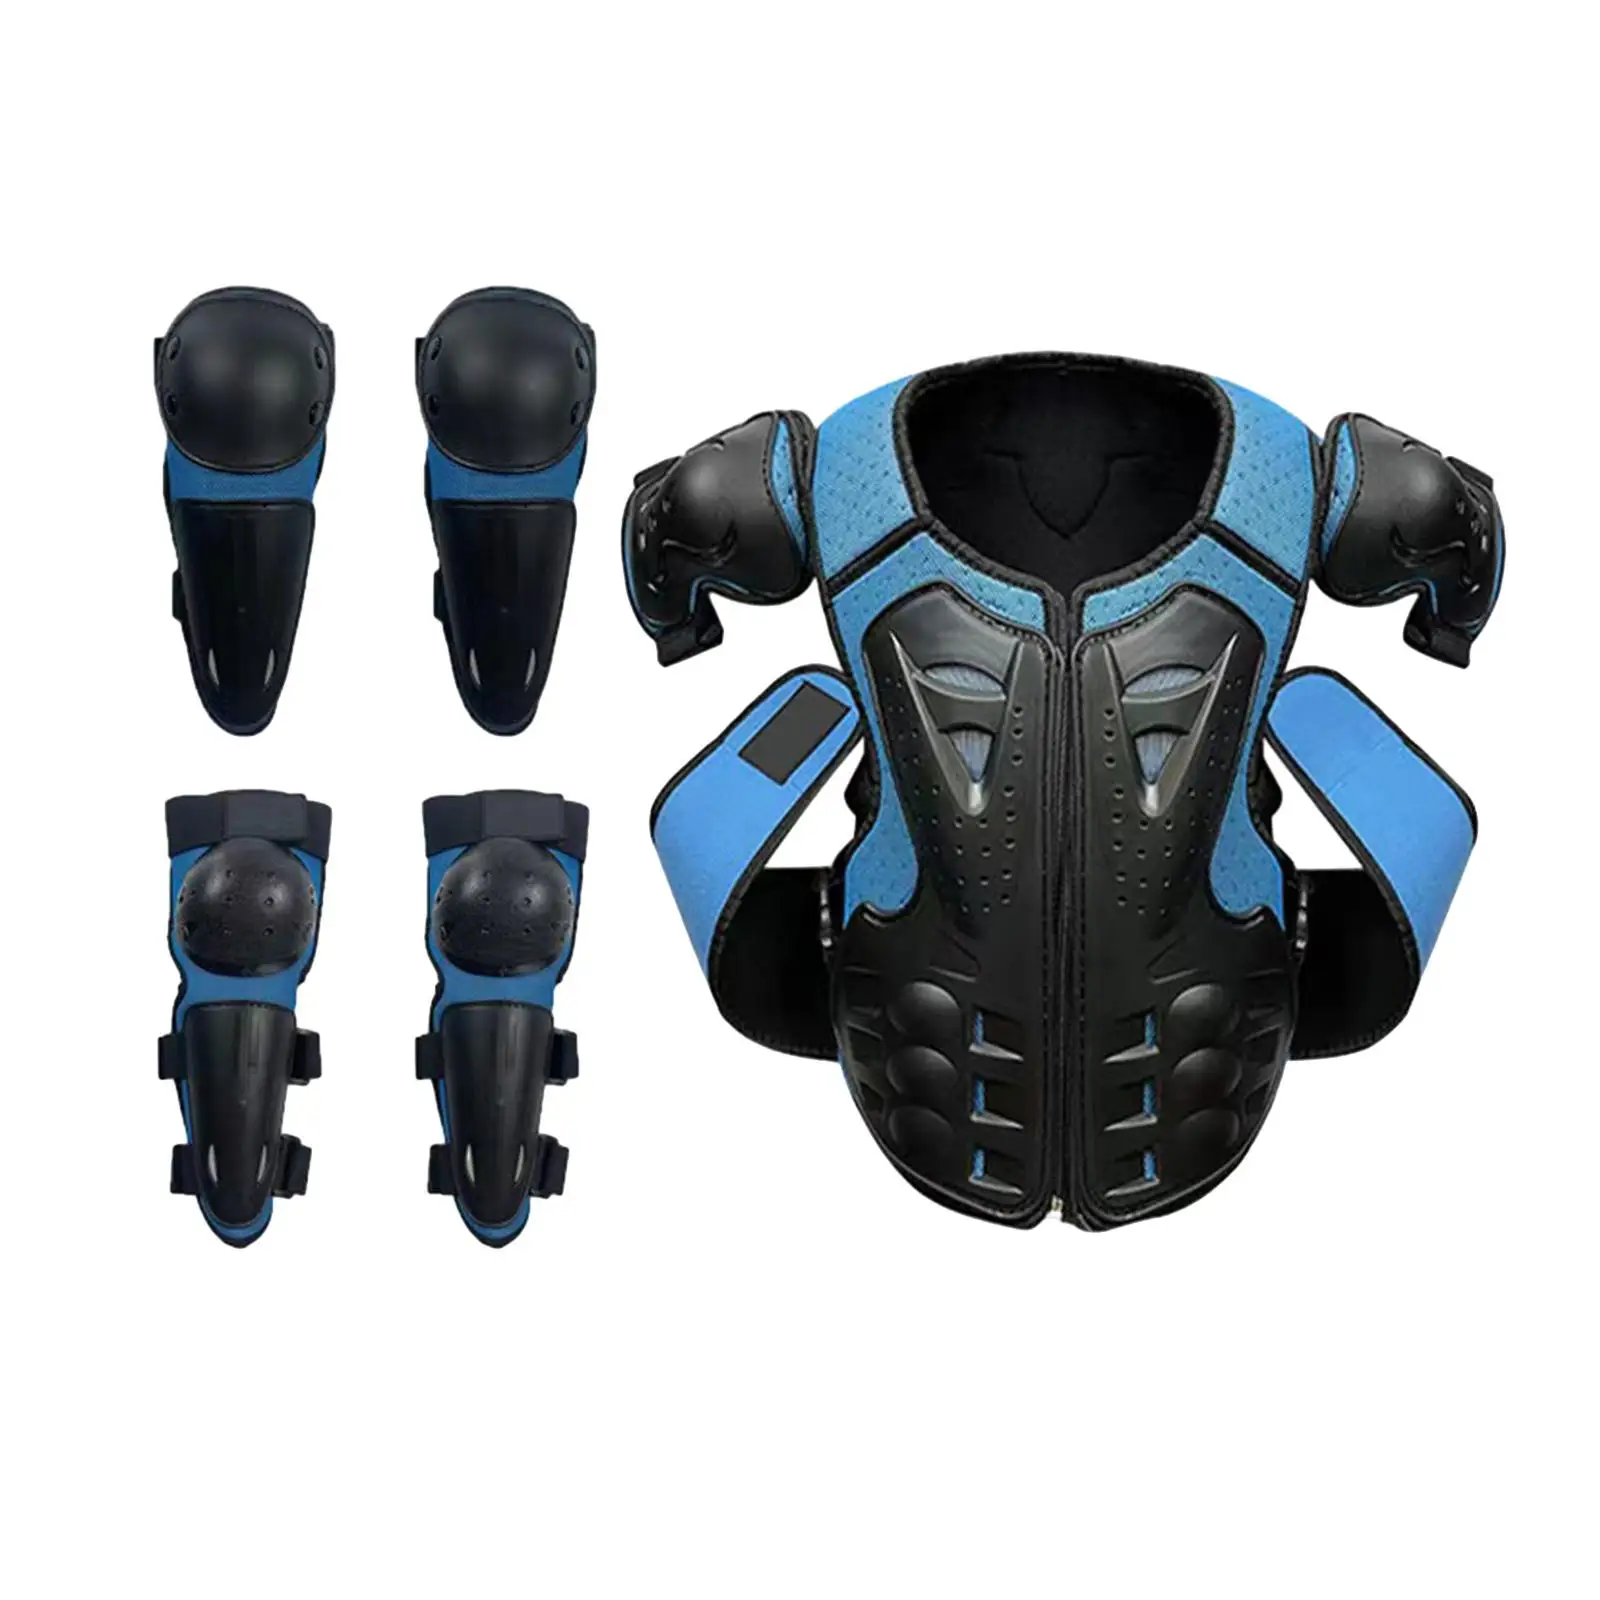 Dirt Bike Gear Chest Protector Motocross Gear Motorcycle Riding Protective Gear